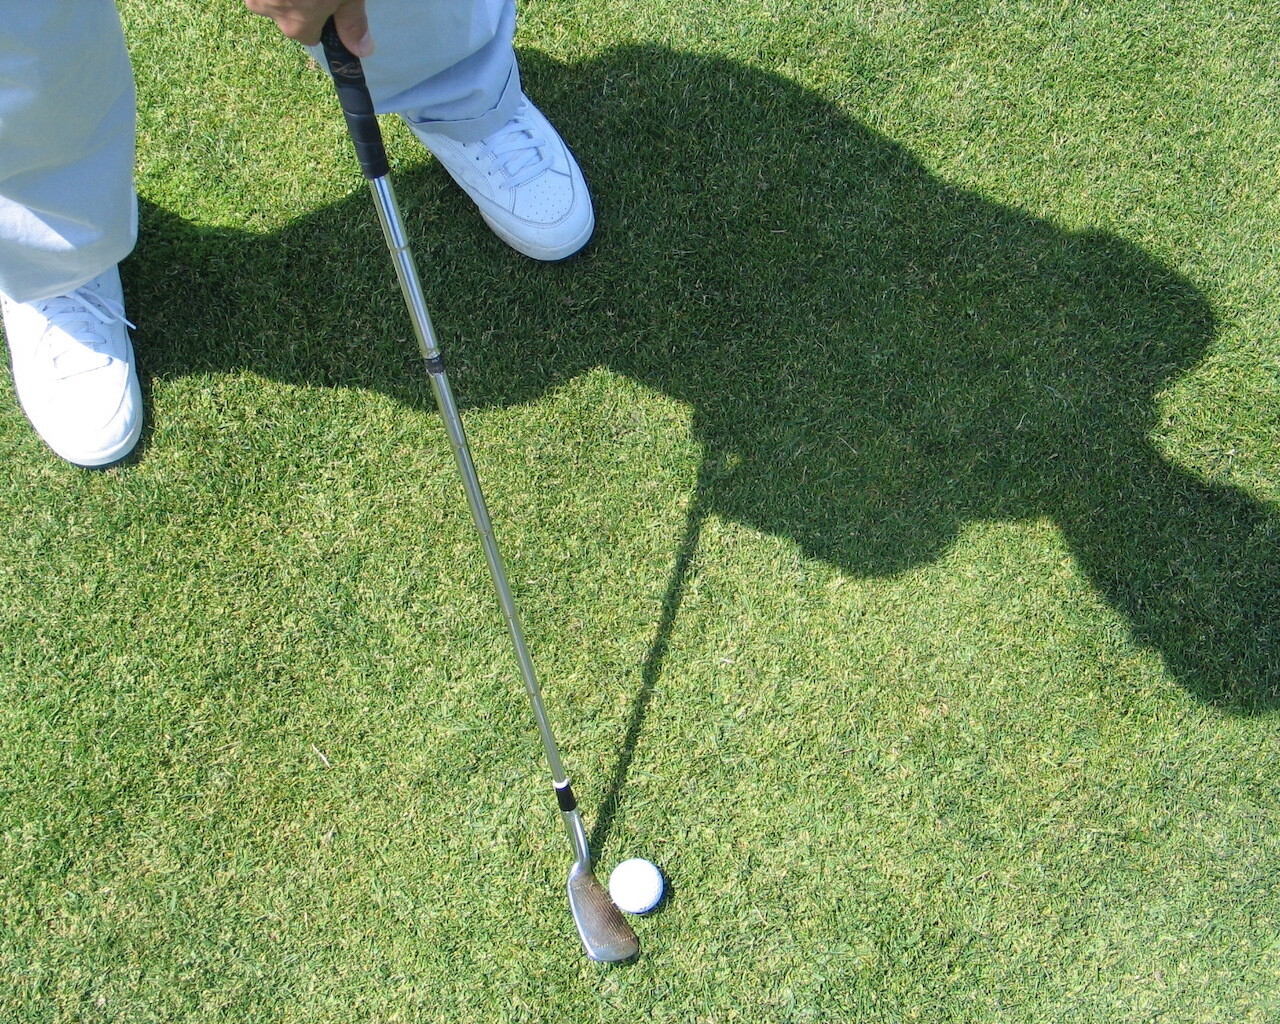 pitching wedge and proper stance